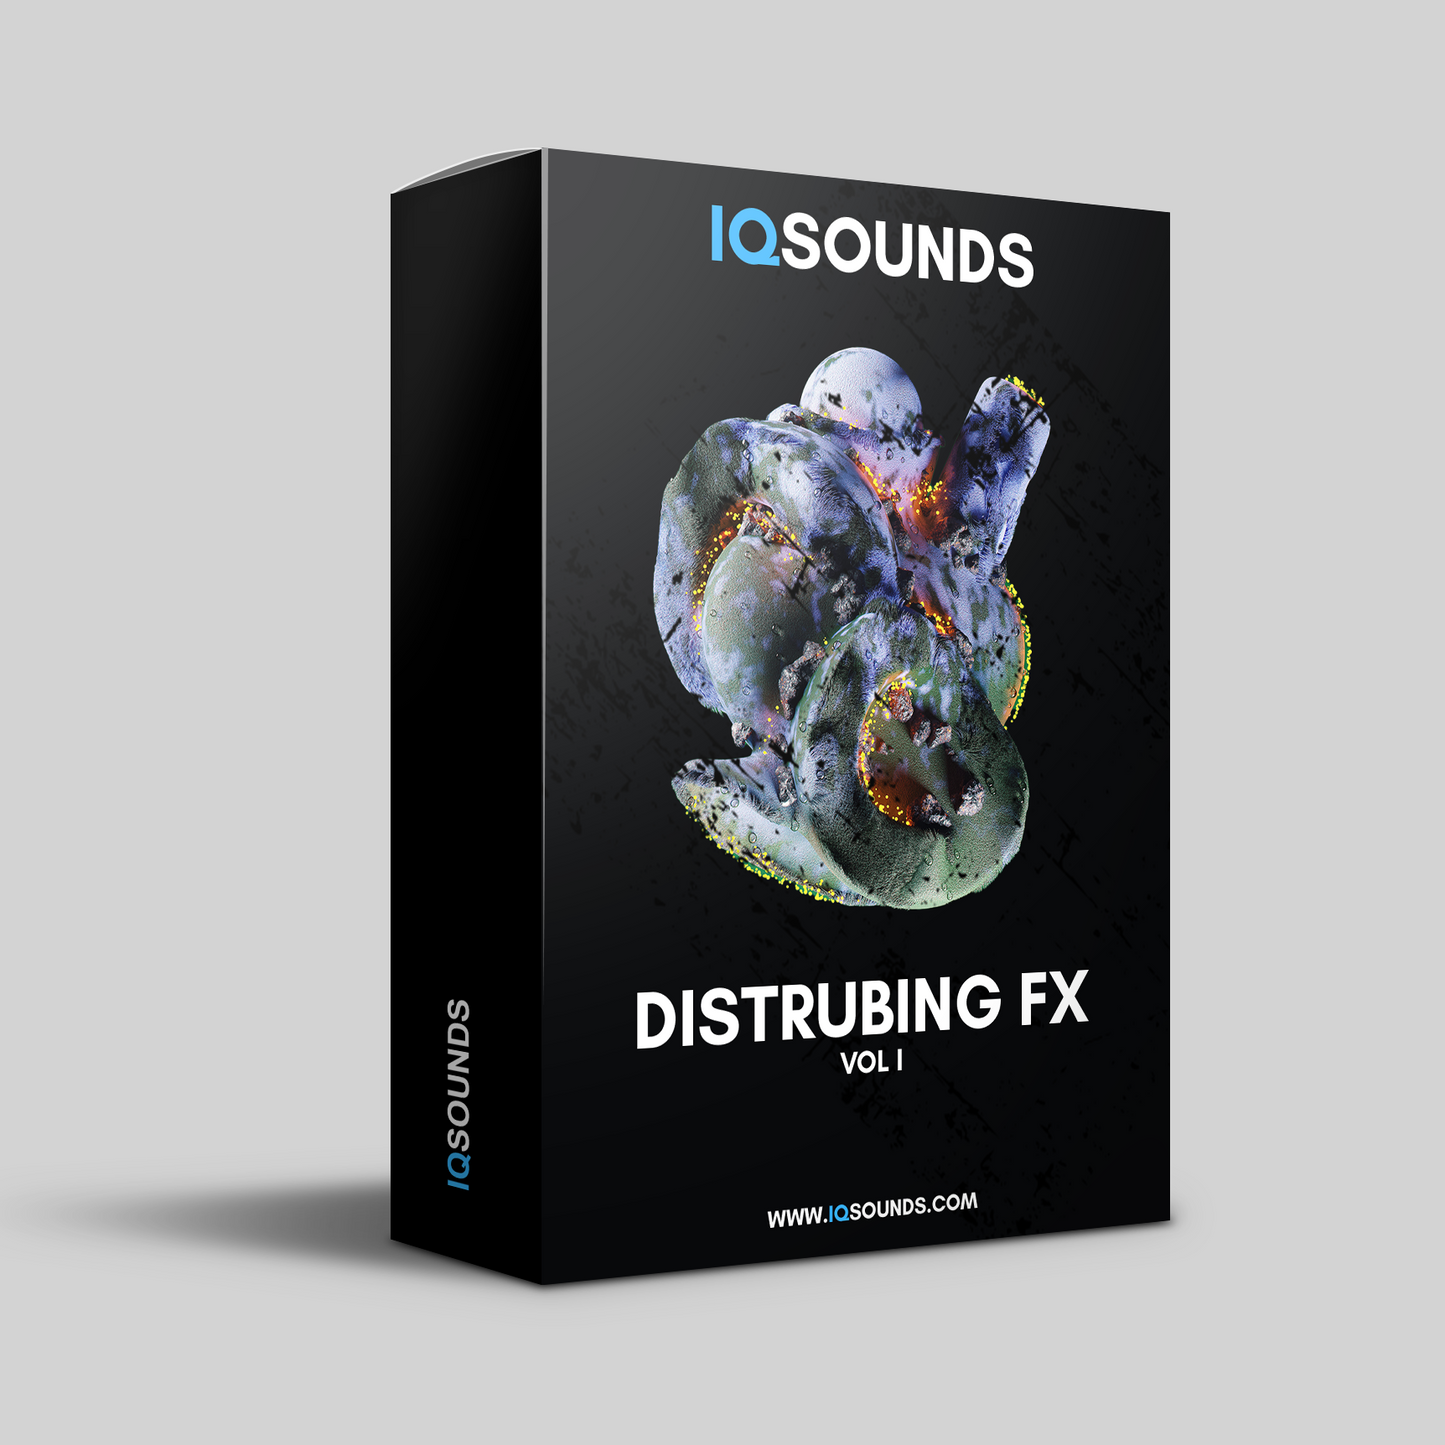 Sound Effects, FX One-Shots, Ambient Sounds, Professional Quality, Music Production, Sound Design, DAW, Music Producers, Audio Processing, Unique Sound Effects, High-Quality Samples, Disturbing FX vol I